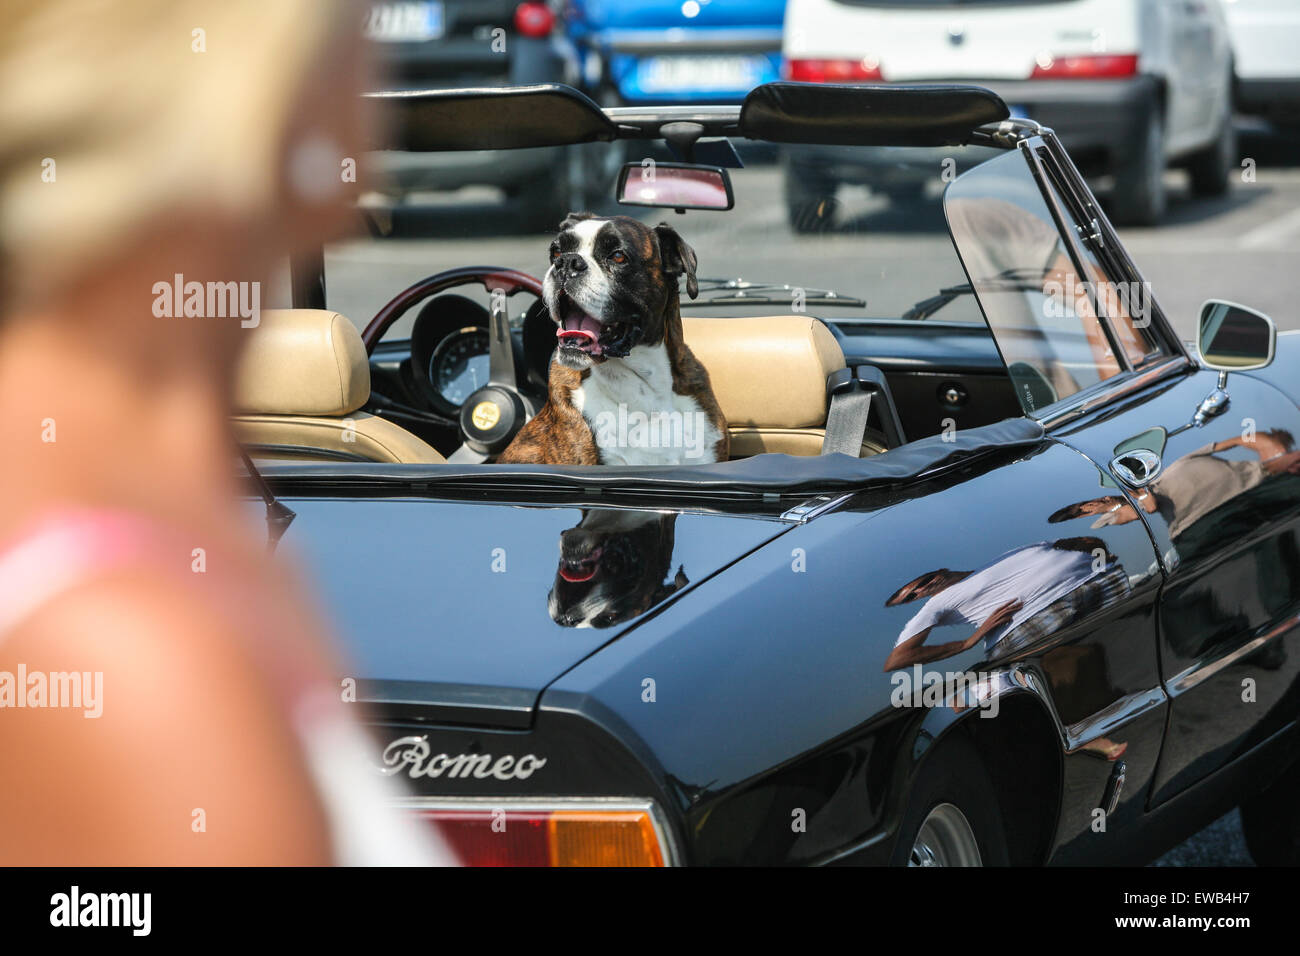 Dog in Vintage car, Alfa at vintage car/motorbike rally Piazzale,square Michelangelo overlooking Firenze/ Florence Stock Photo - Alamy